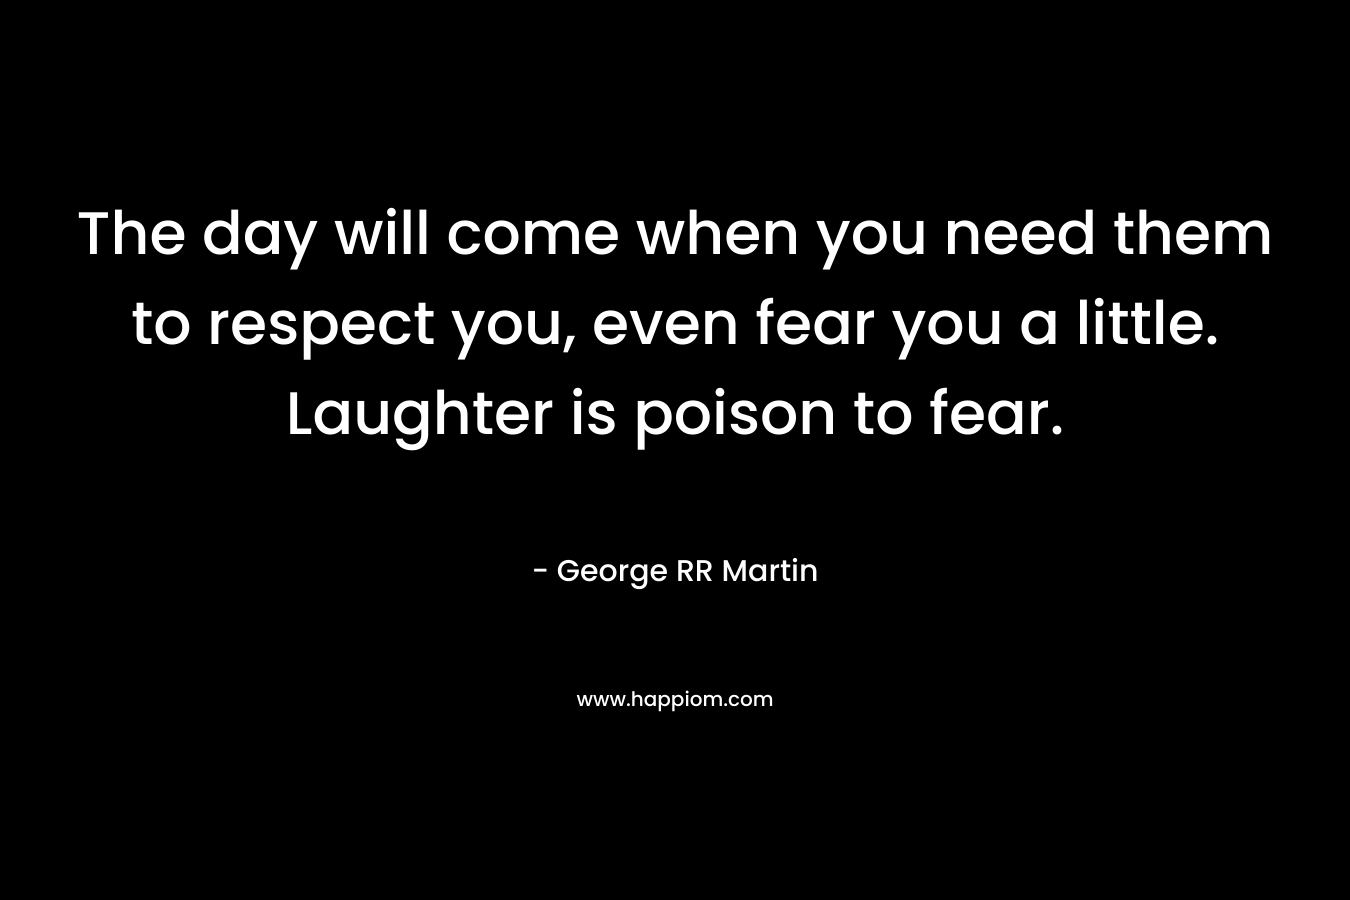 The day will come when you need them to respect you, even fear you a little. Laughter is poison to fear.